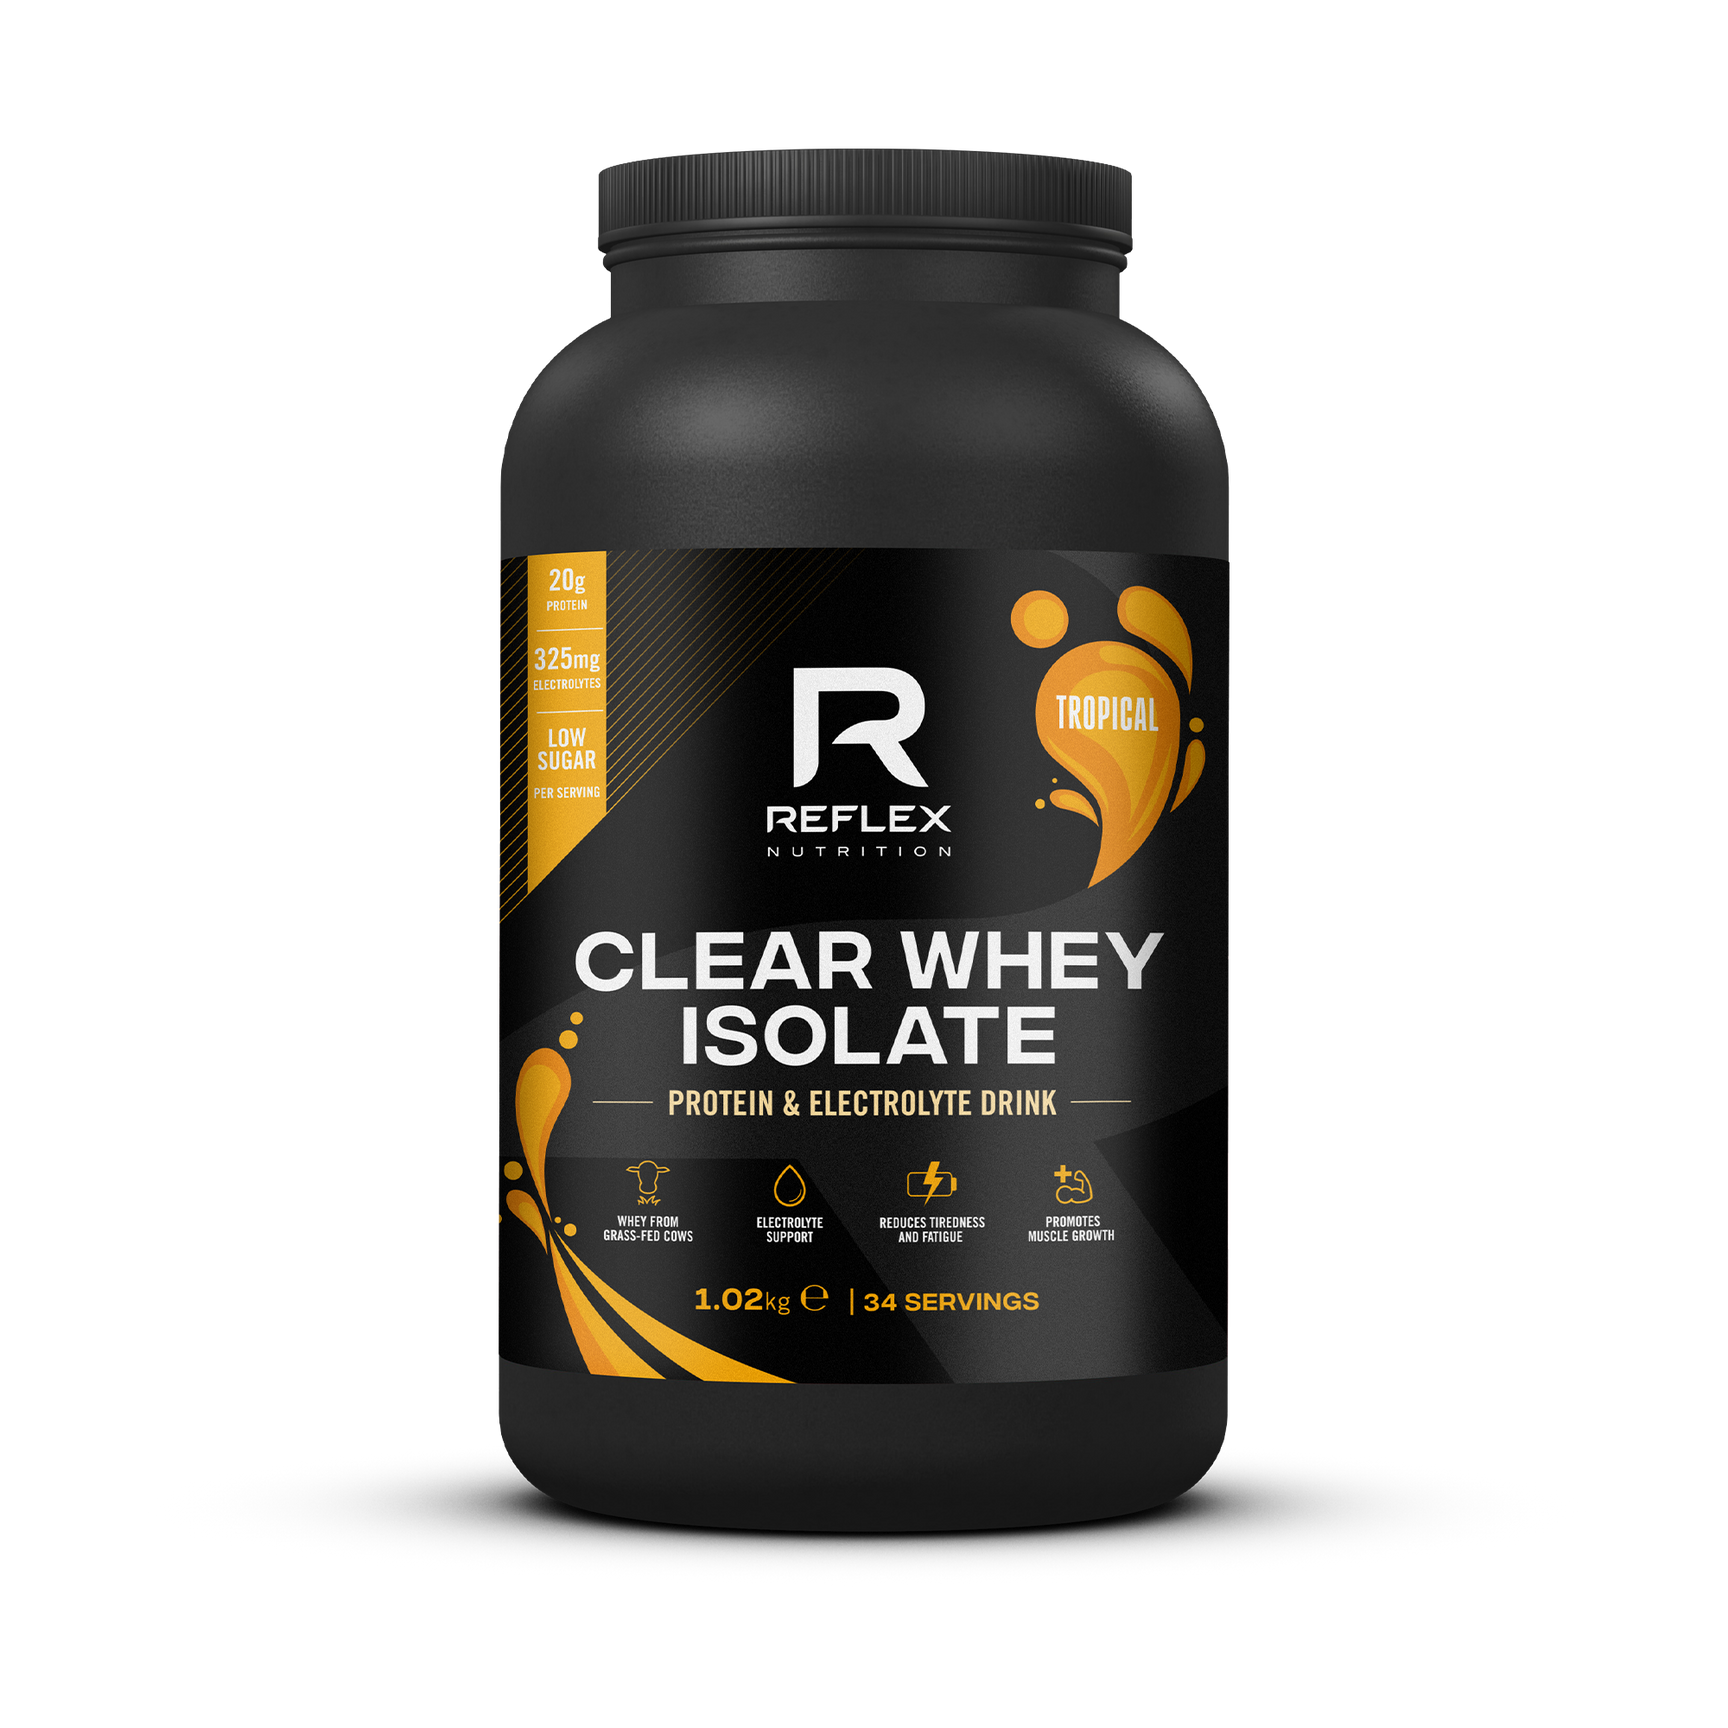 Experience the Benefits of Organic Whey Protein Isolate